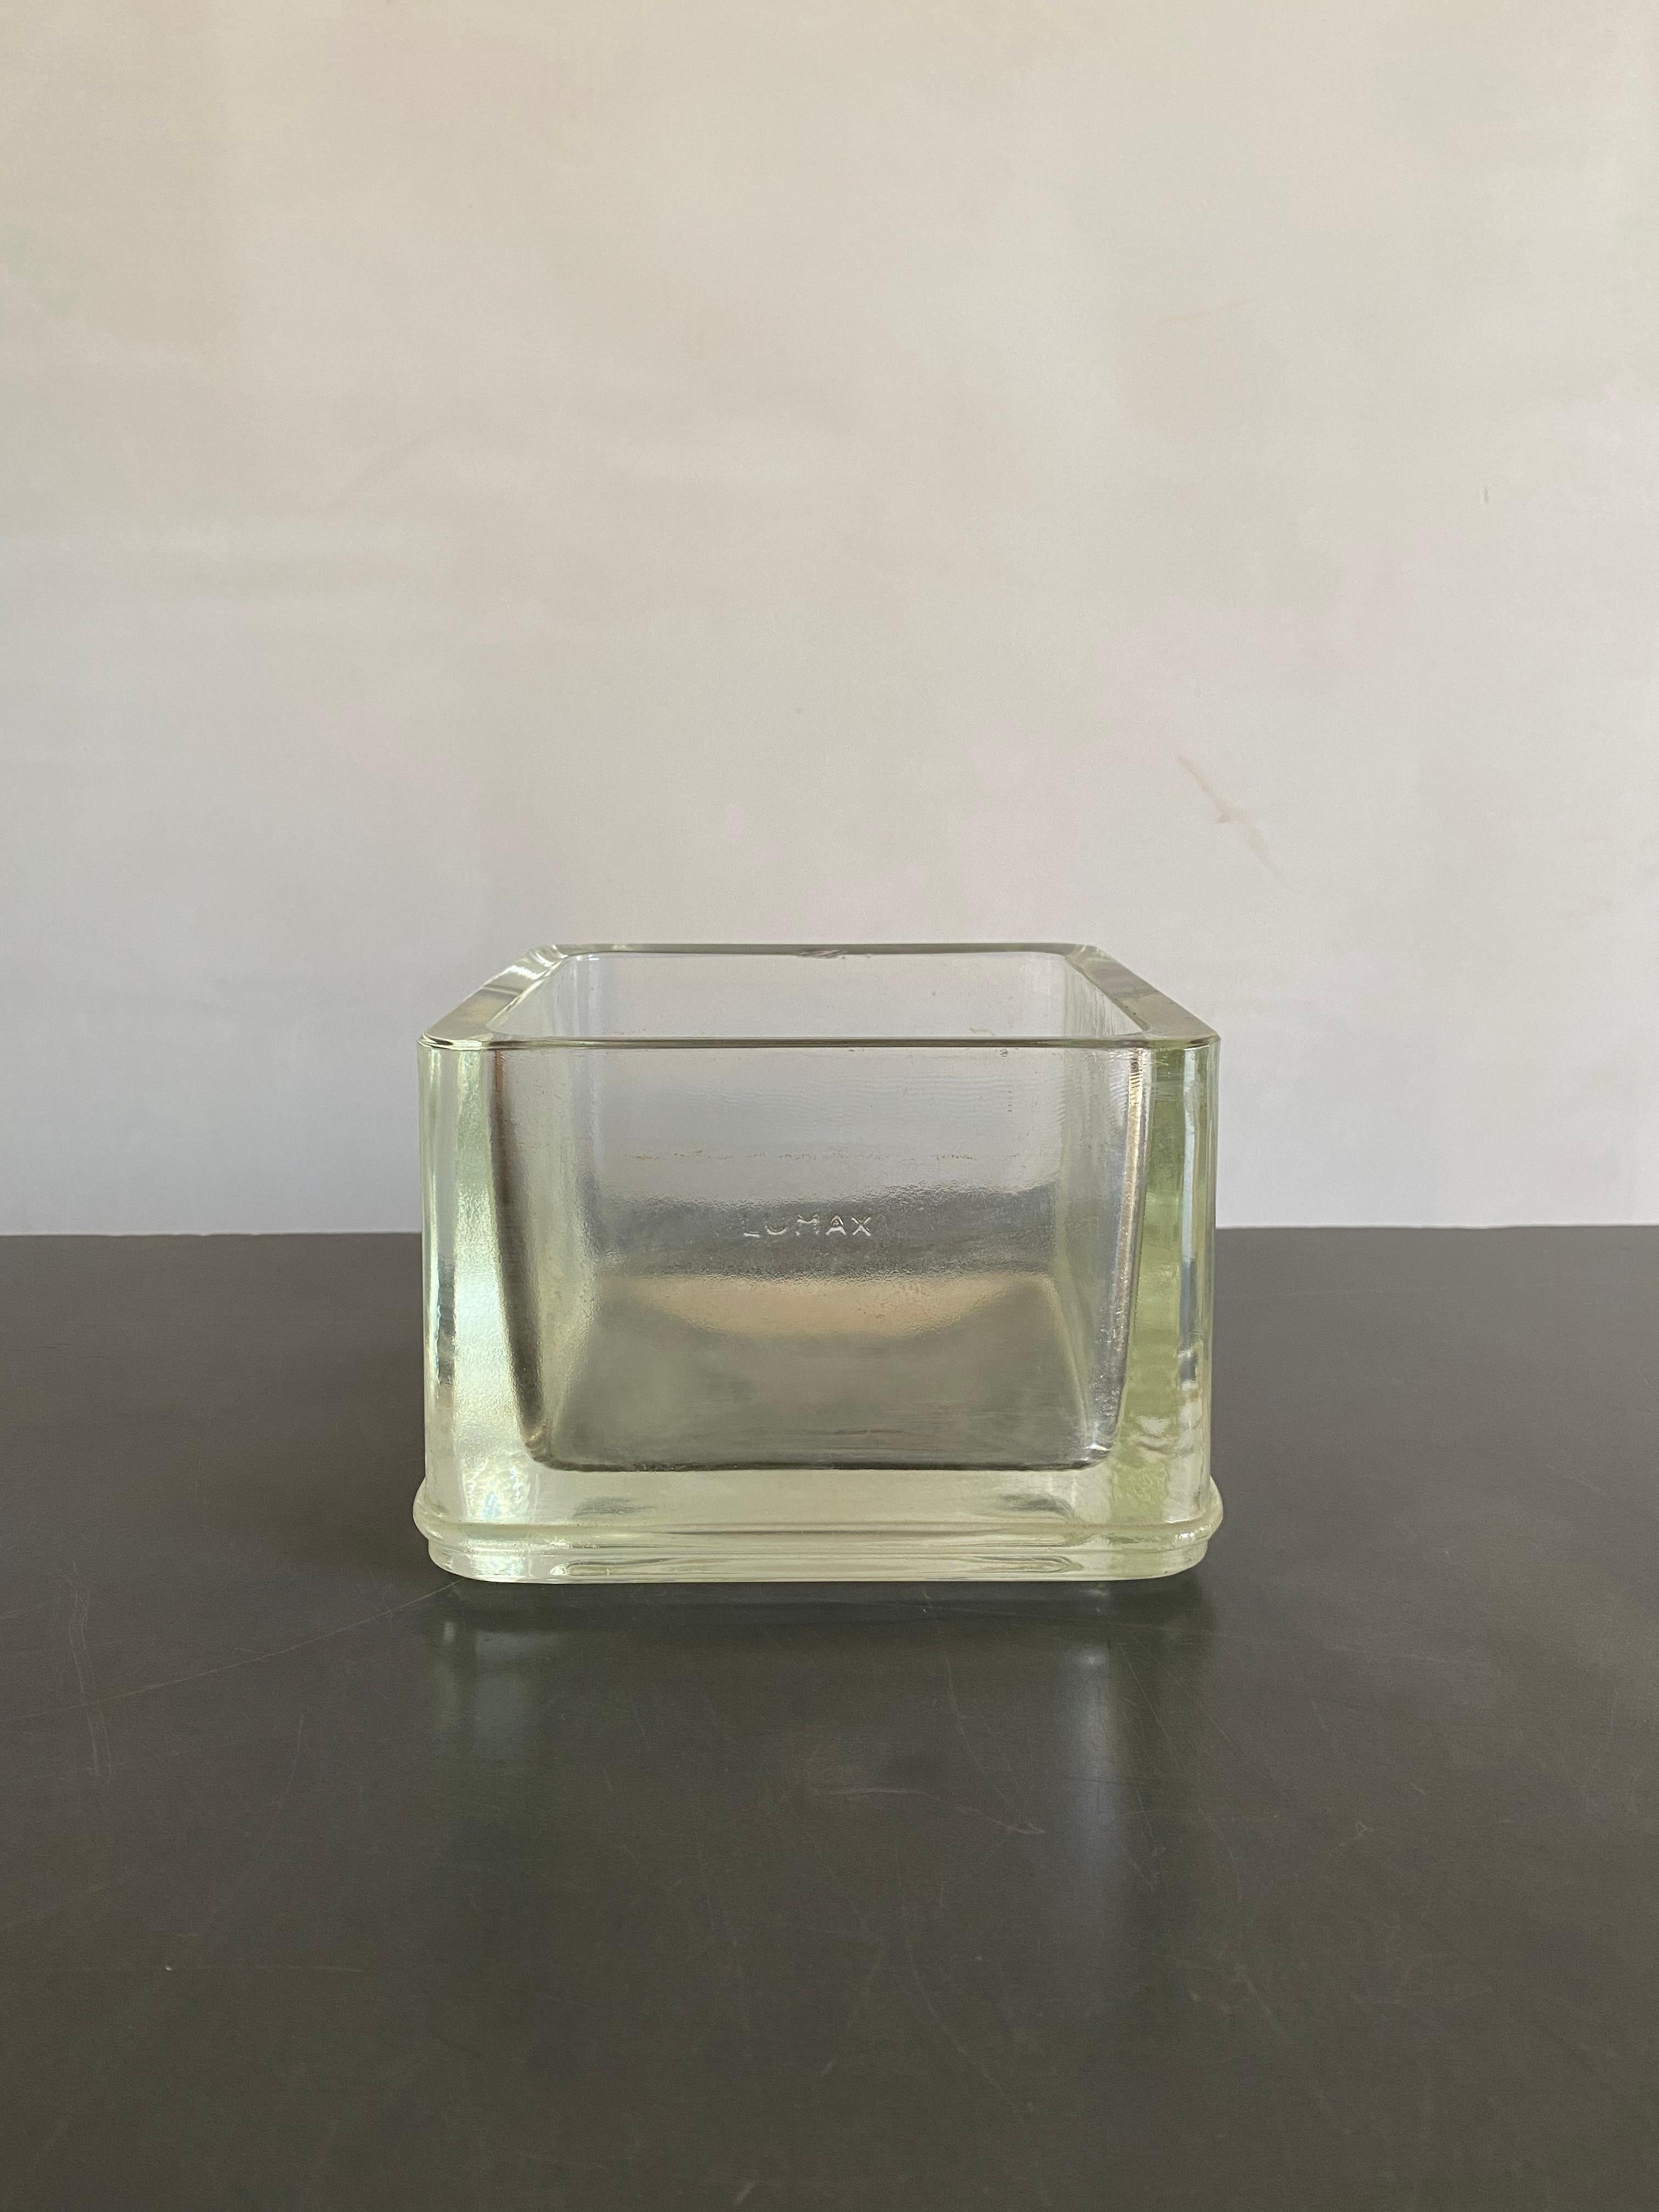 A large moulded glass Lumax vide-poche designed by Le Corbusier. Signed 'LUMAX'.

Wear consistent with age and use.